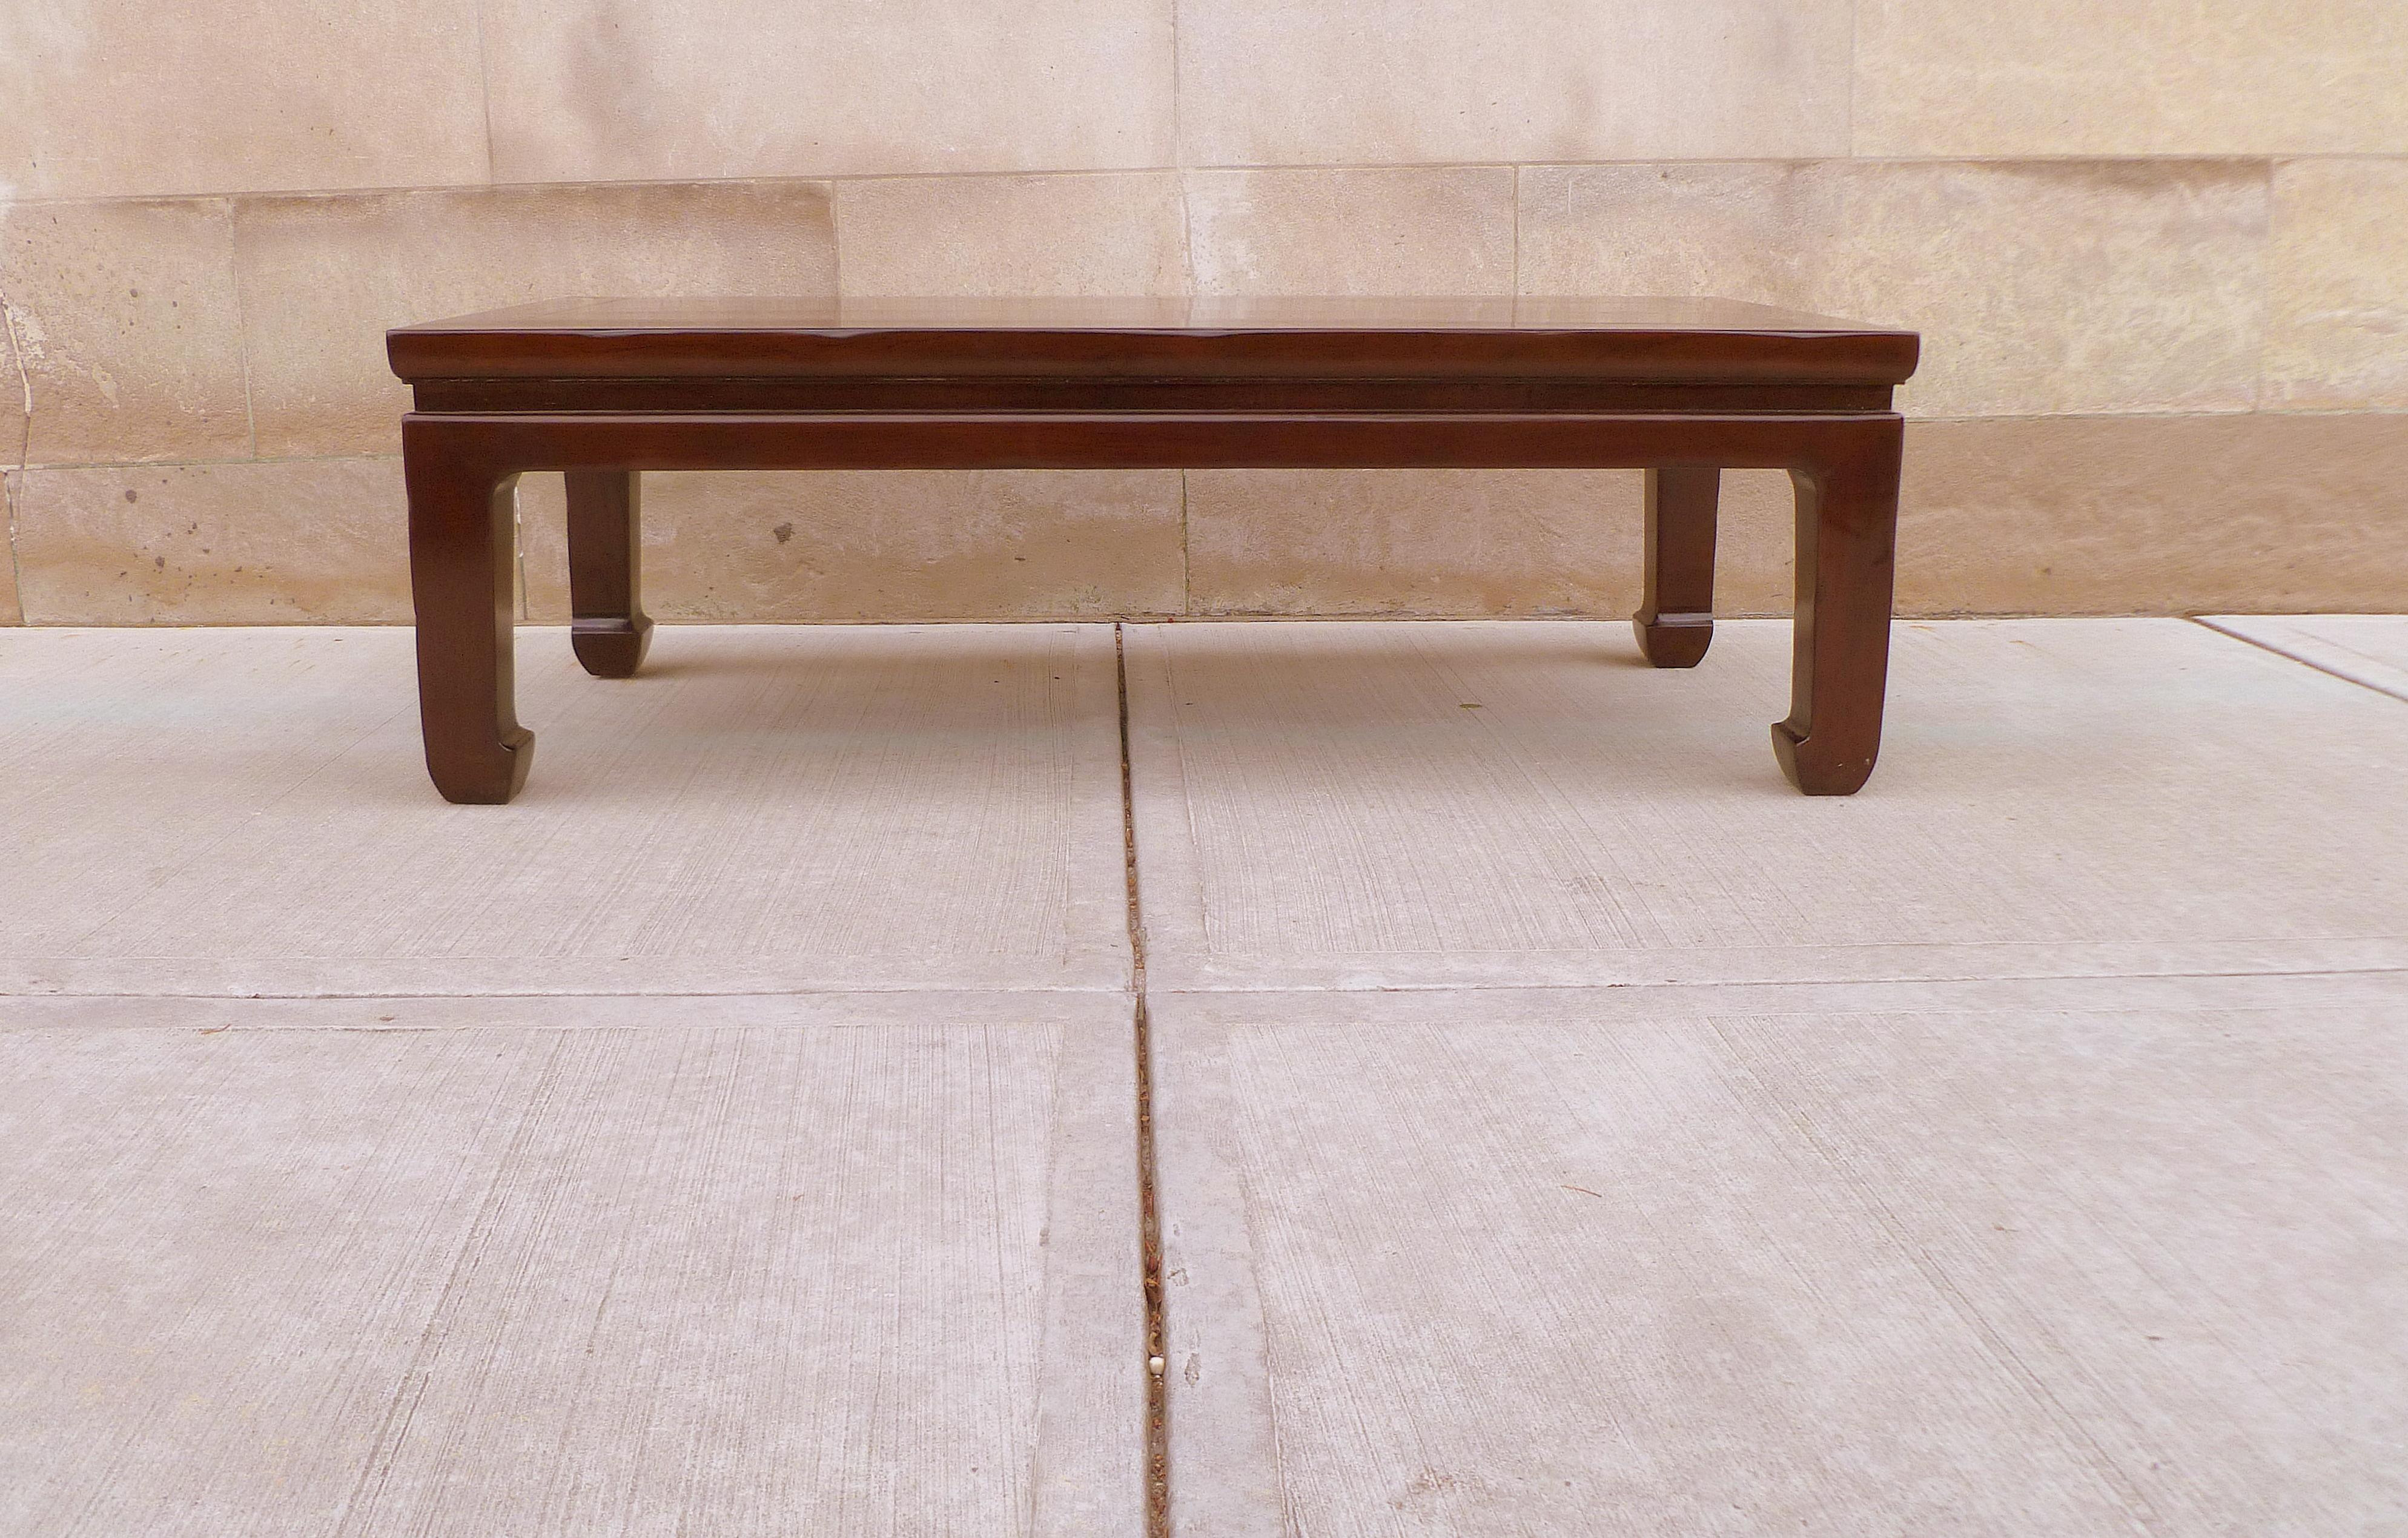 A simple and elegant rectangular jumu wood low table, beautiful form and color. We carry fine quality furniture with elegant finished and has been appeared many times in 